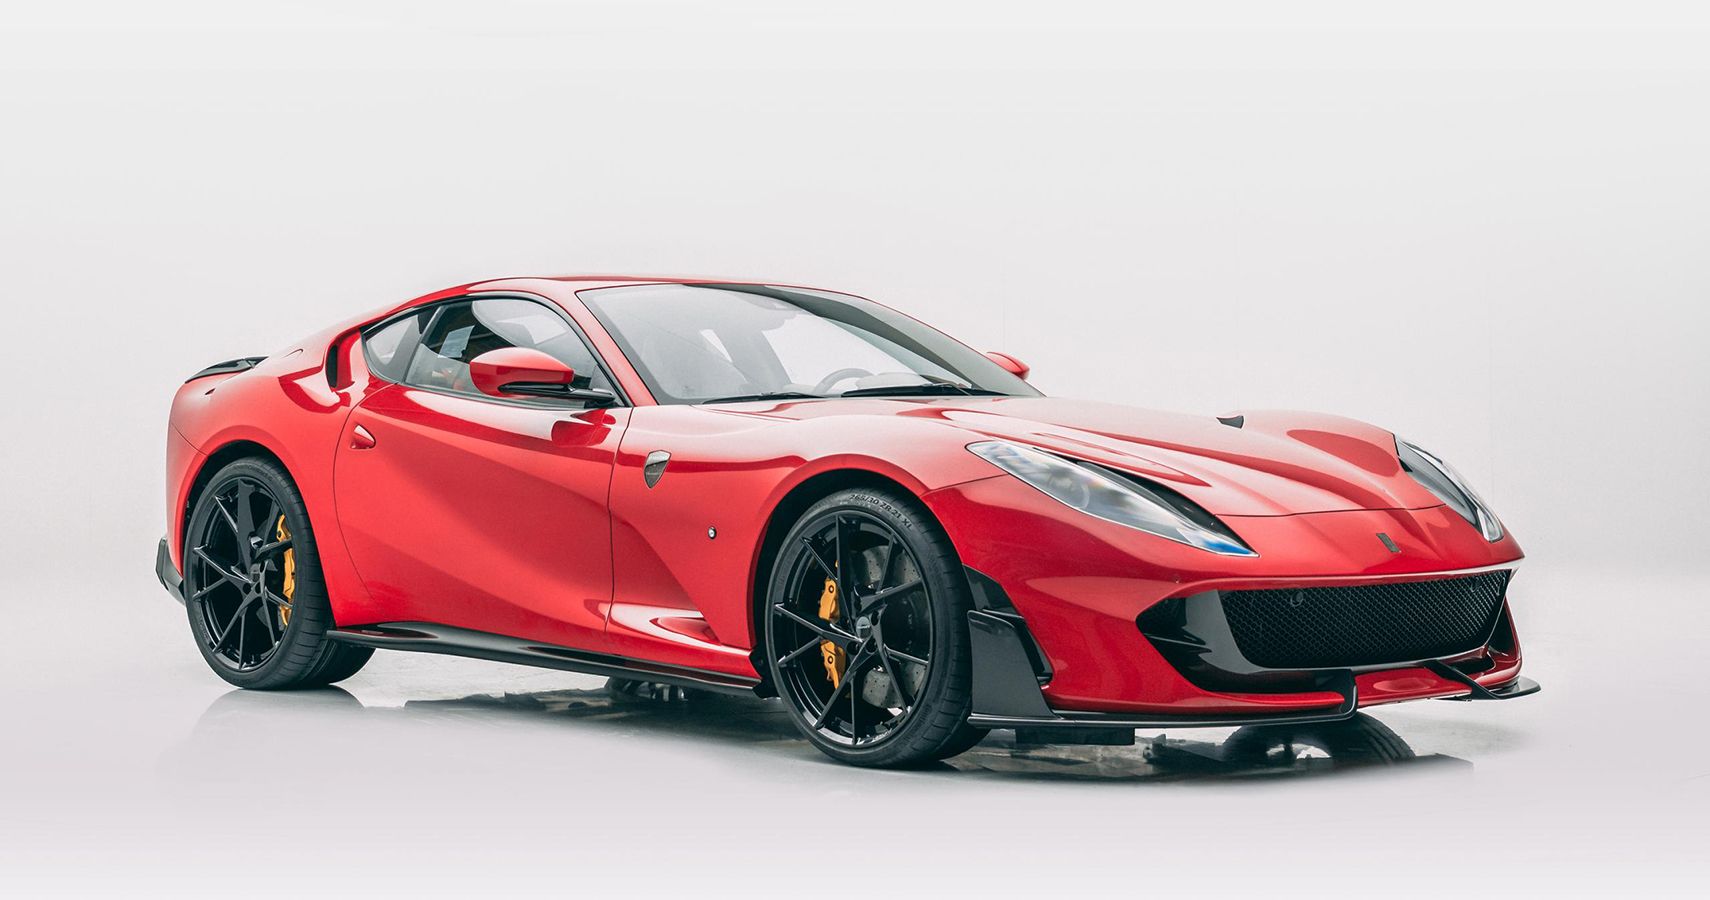 Mansory Is Unusually Understated With Carbon Fiber Soft Kit For Ferrari 812 Superfast